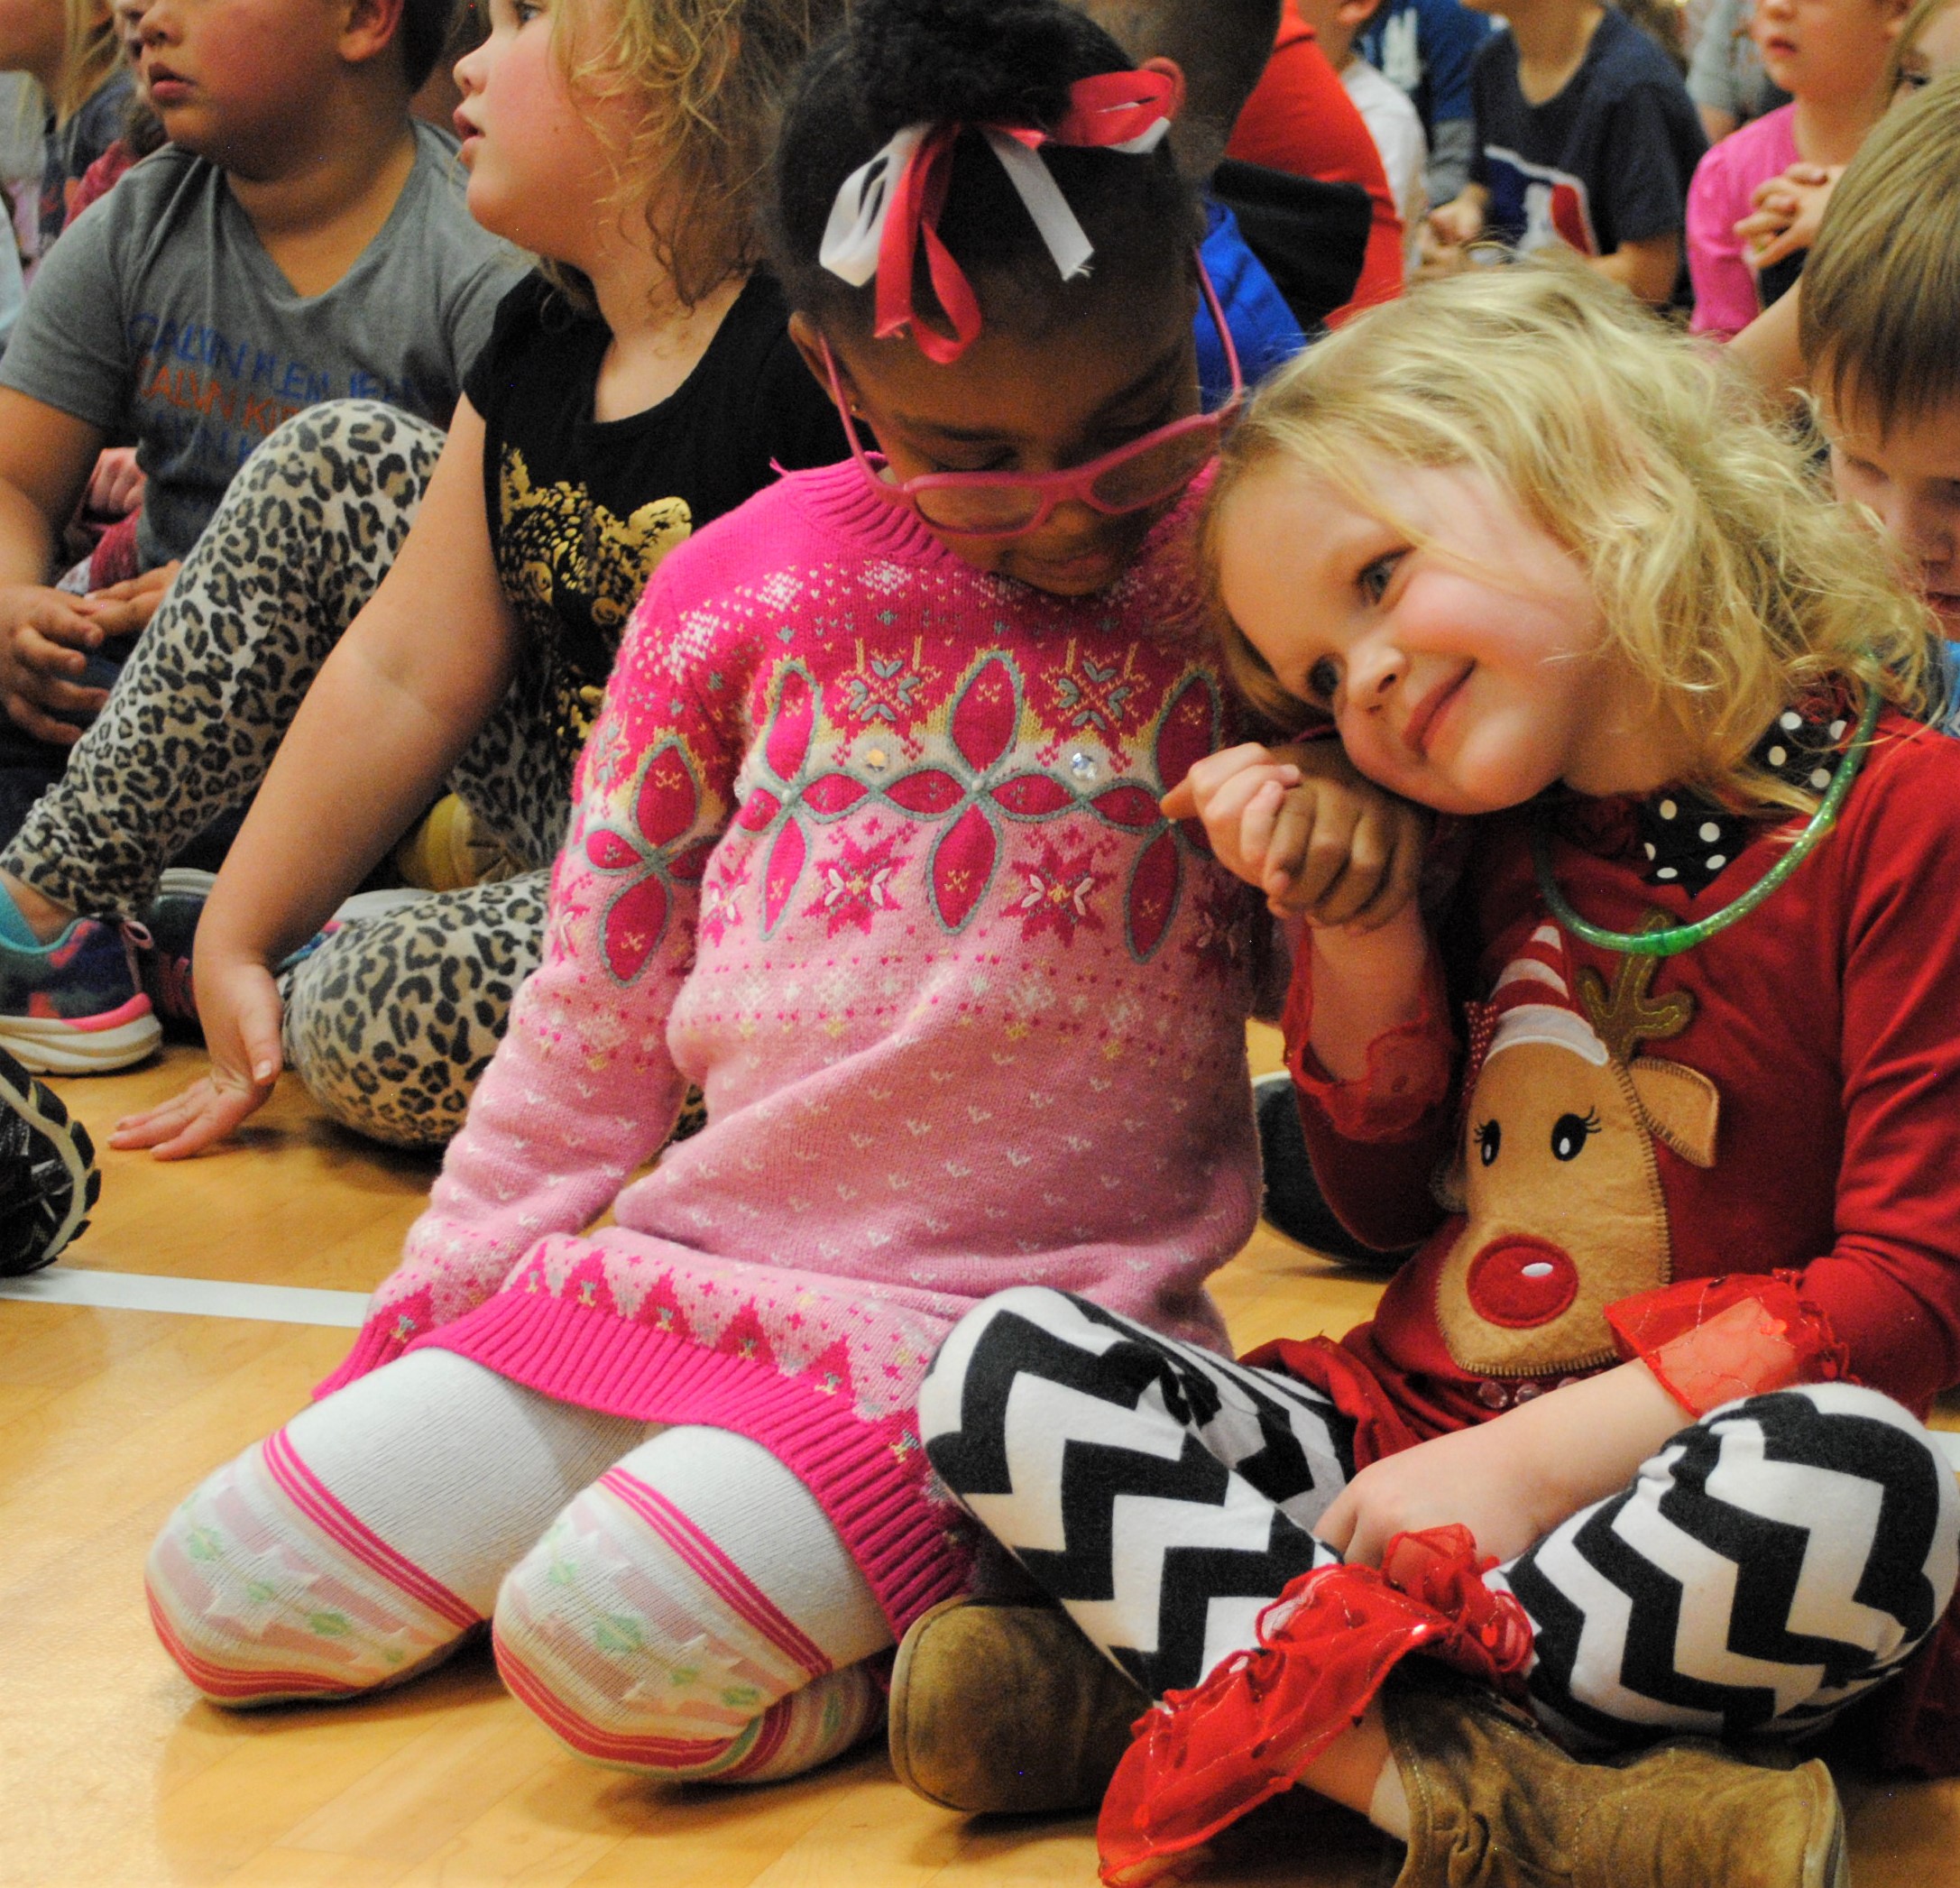 A couple of preschool pals, Saniah Branner (left) and Coraline Collison, were feeling the love of Christmas. Photo by Shelby Tankersley.